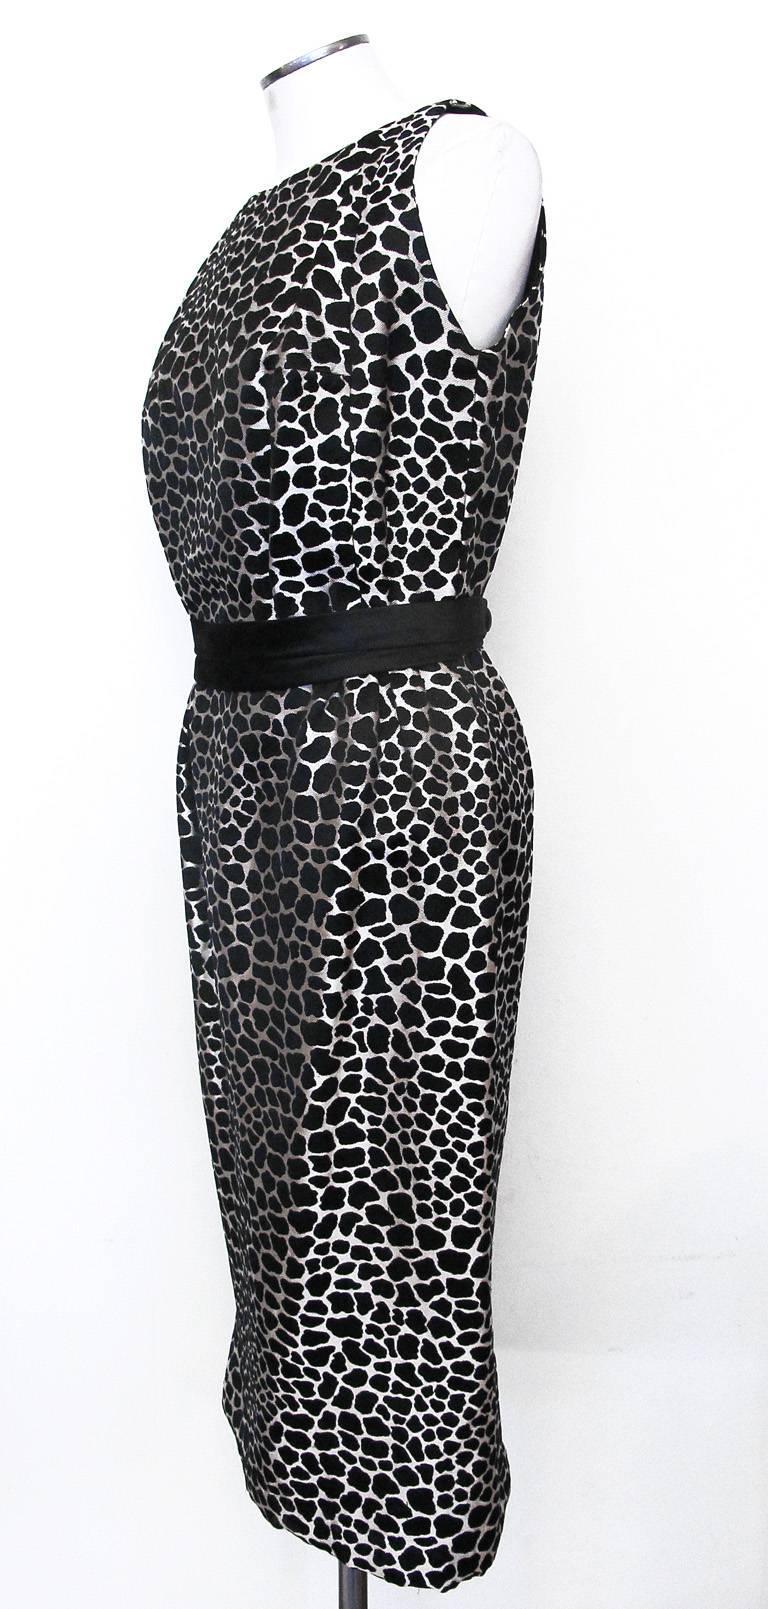 Galanos Black and White Giraffe Print Sleeveless Dress with Matching Jacket For Sale 2